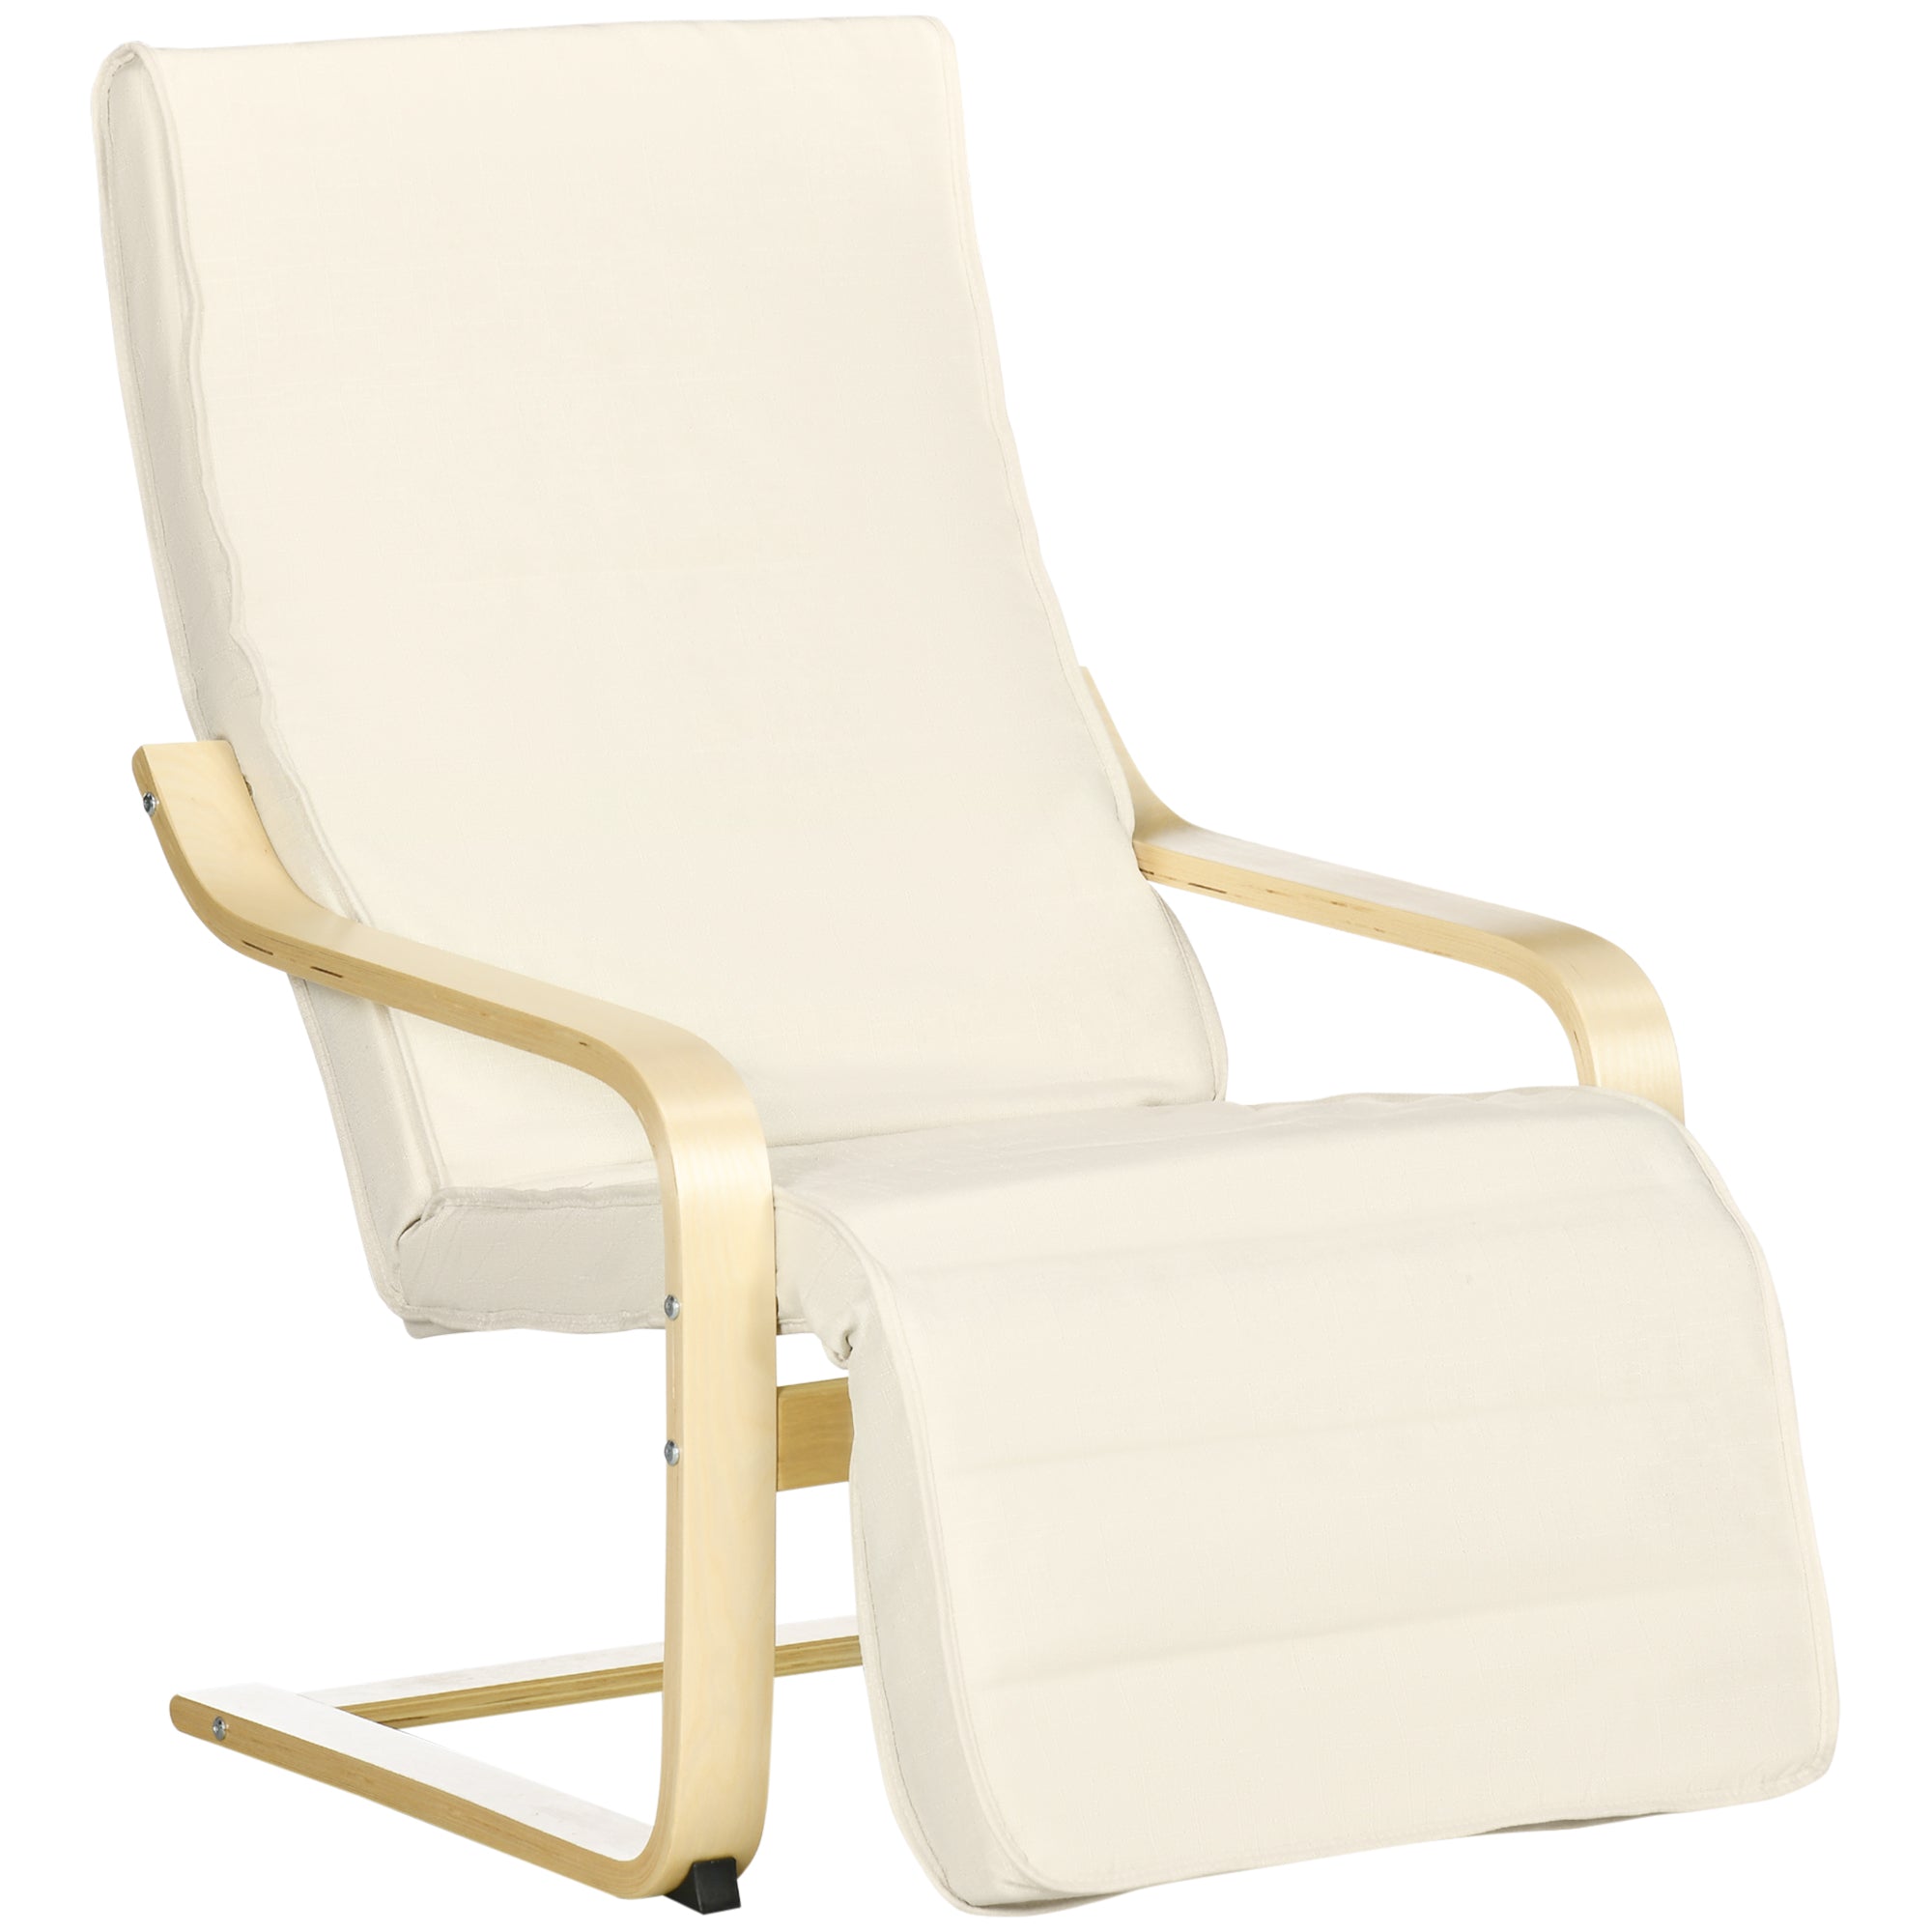 HOMCOM Wooden Lounging Chair Deck Relaxing Recliner Lounge Seat with Adjustable Footrest & Removable Cushion, Cream White - TovaHaus